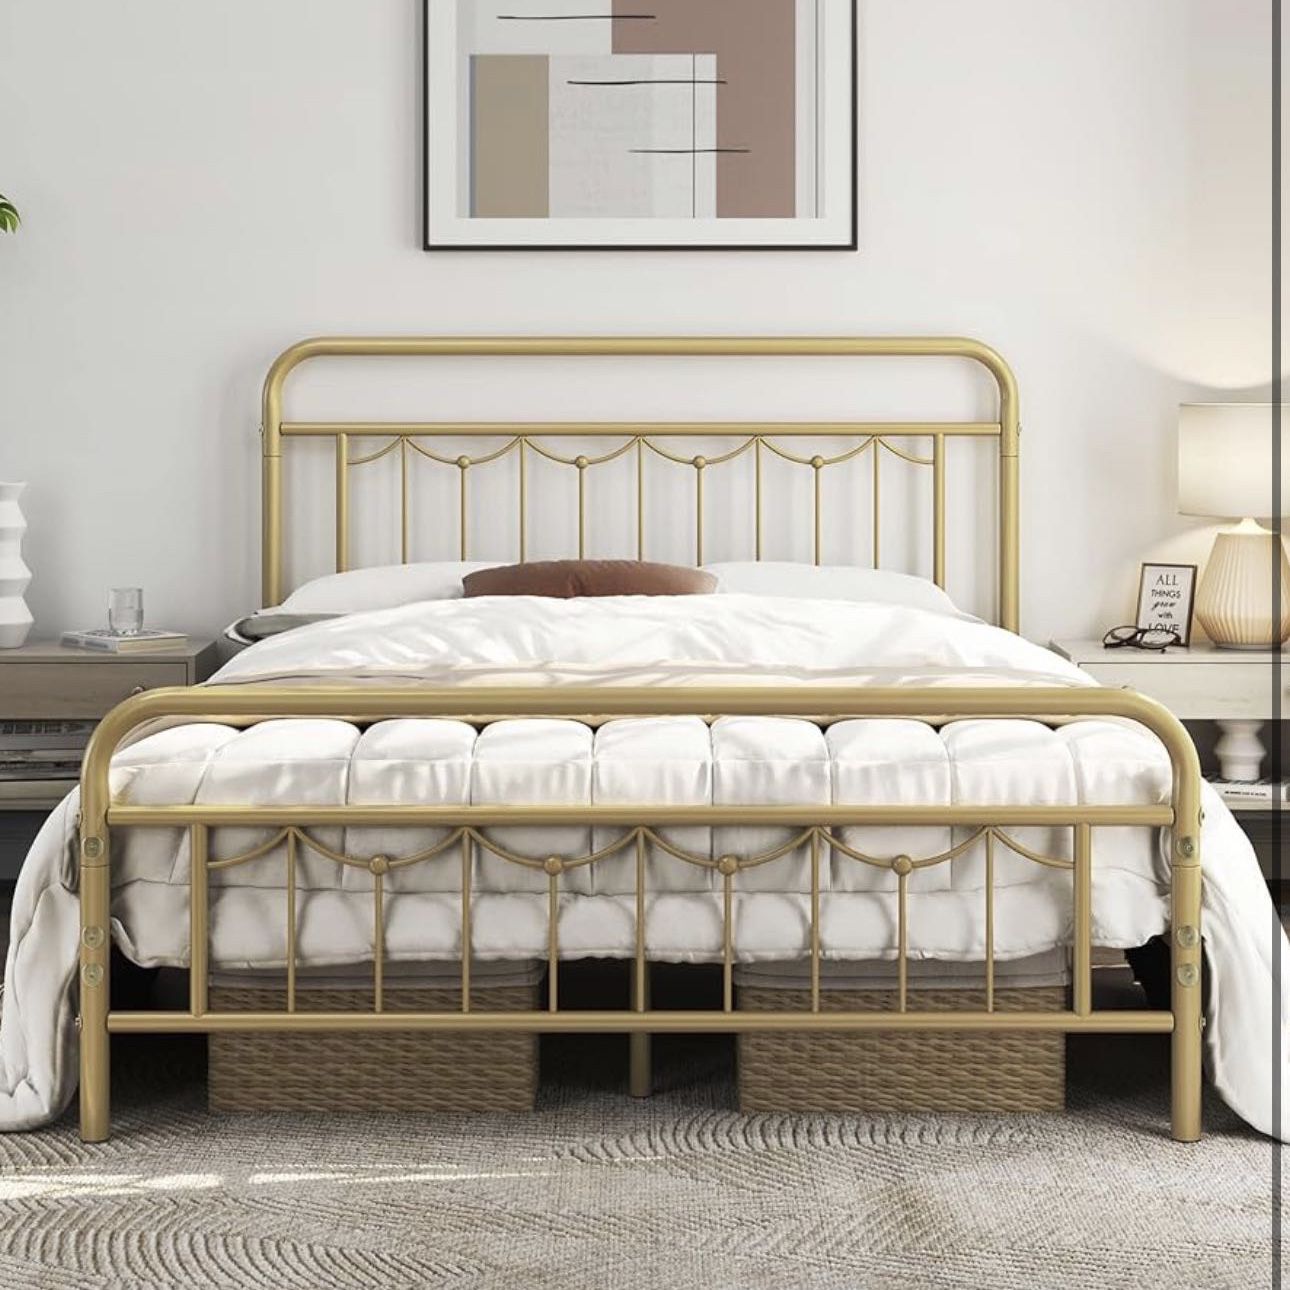 Queen Size Bed Frame with Vintage Headboard and Footboard, Farmhouse Platform, Heavy Duty Steel Slat Support, Ample Under-Bed Storage, No Box Spring N